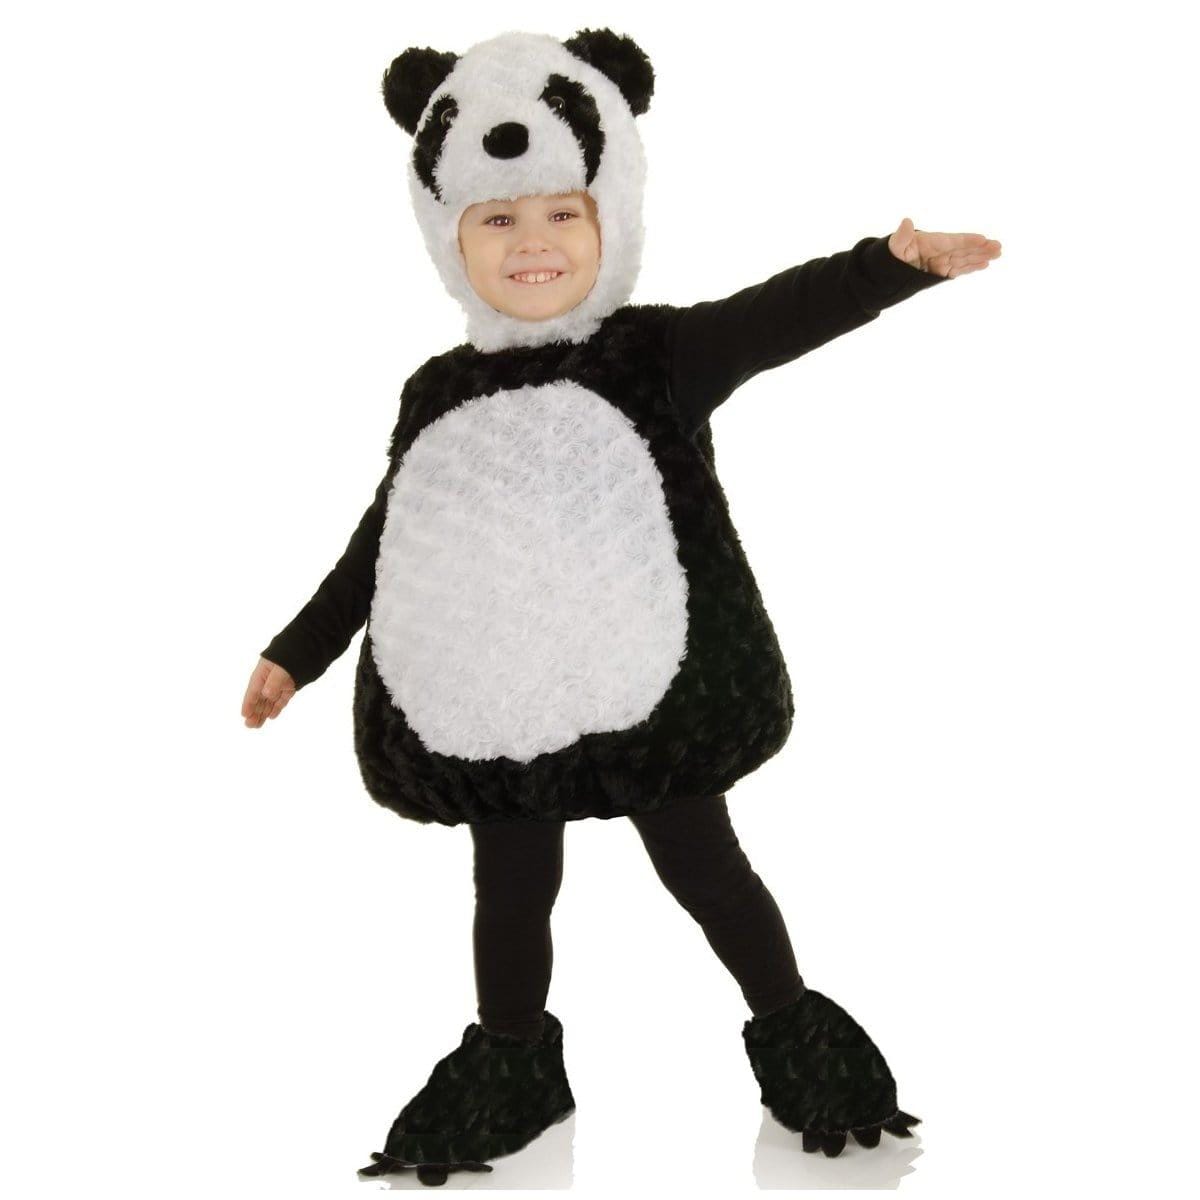 Buy Costumes Panda Costume for Toddlers sold at Party Expert